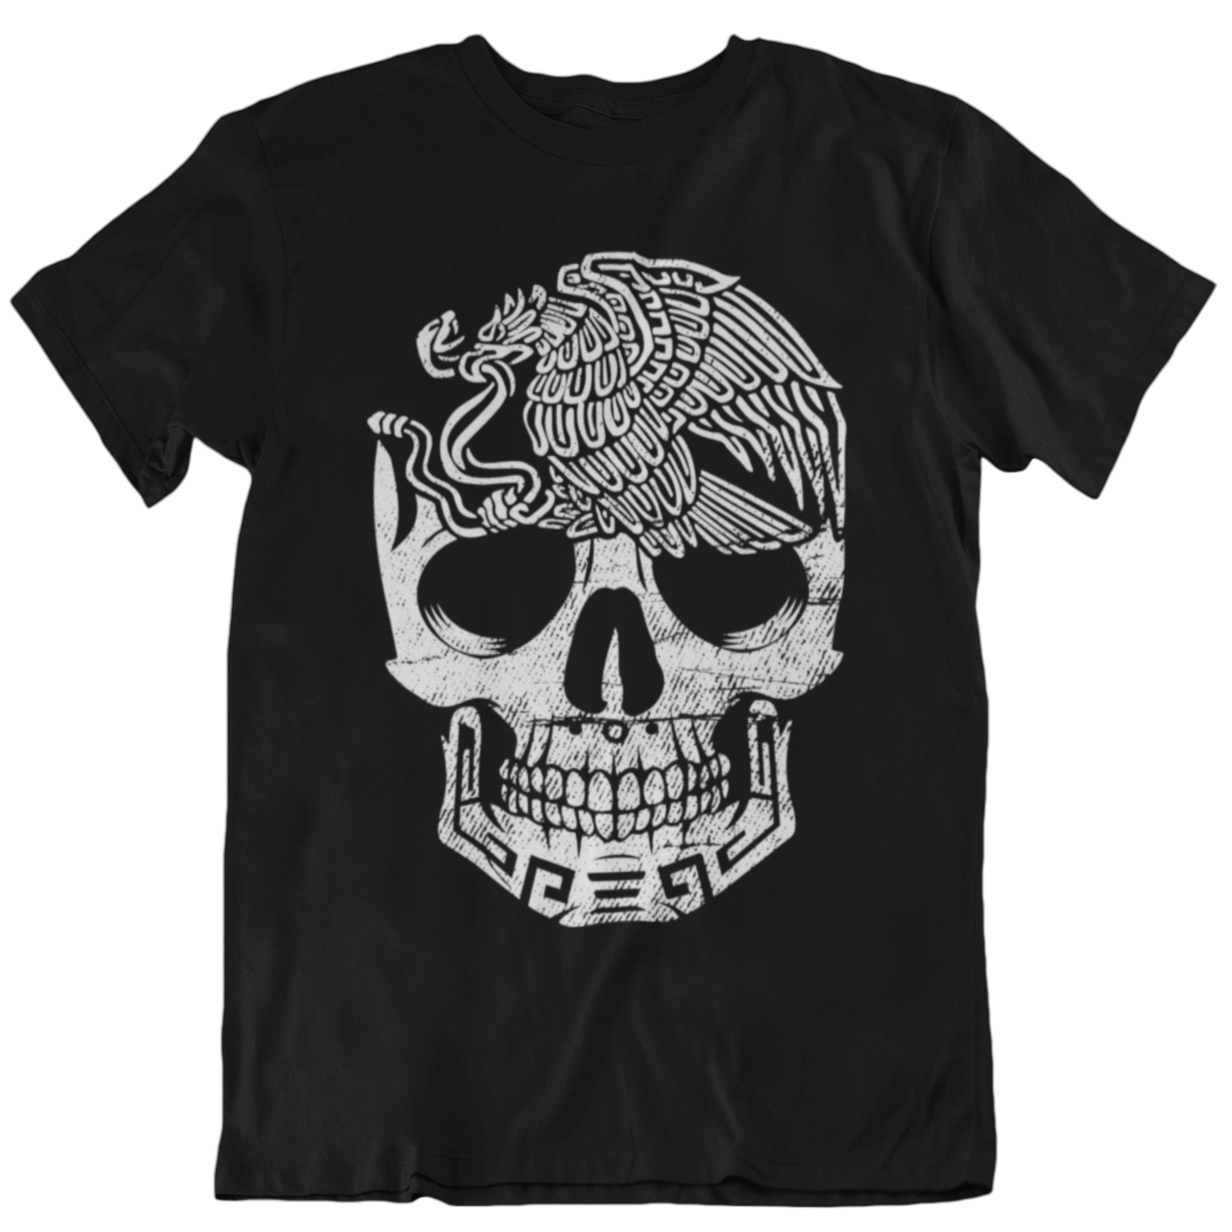 Black t-shirt featuring a graffiti-style skull with a crested caracara, also known as the Mexican eagle